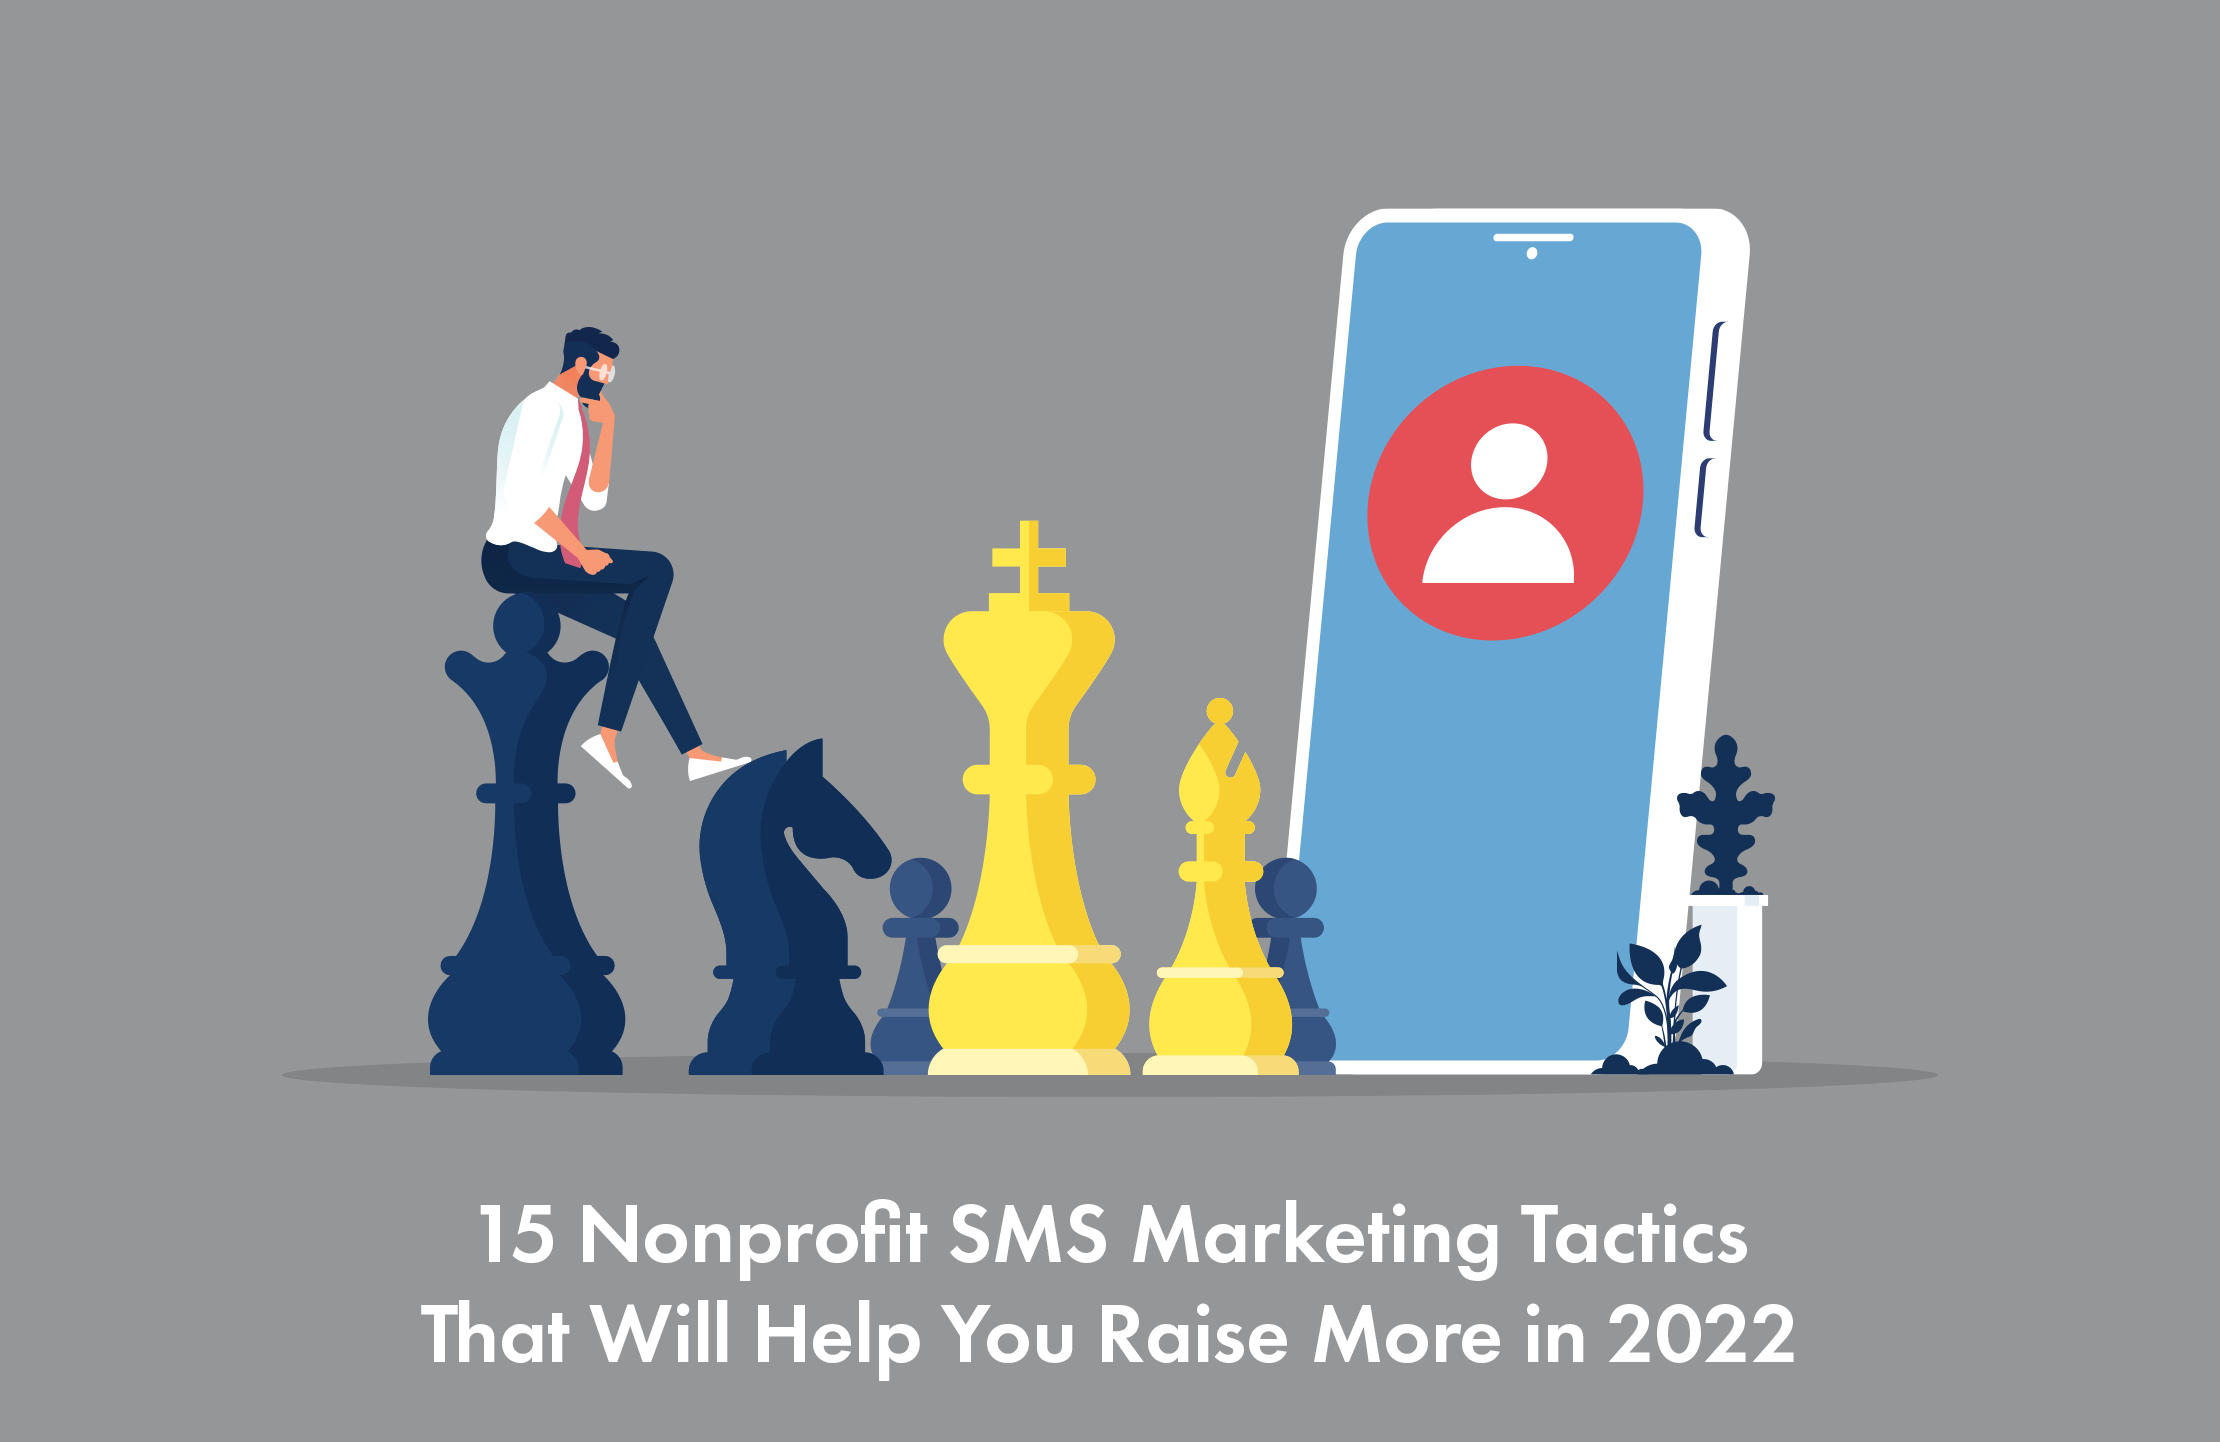 15 Nonprofit SMS Marketing Tactics That Will Help You Raise More in 2022